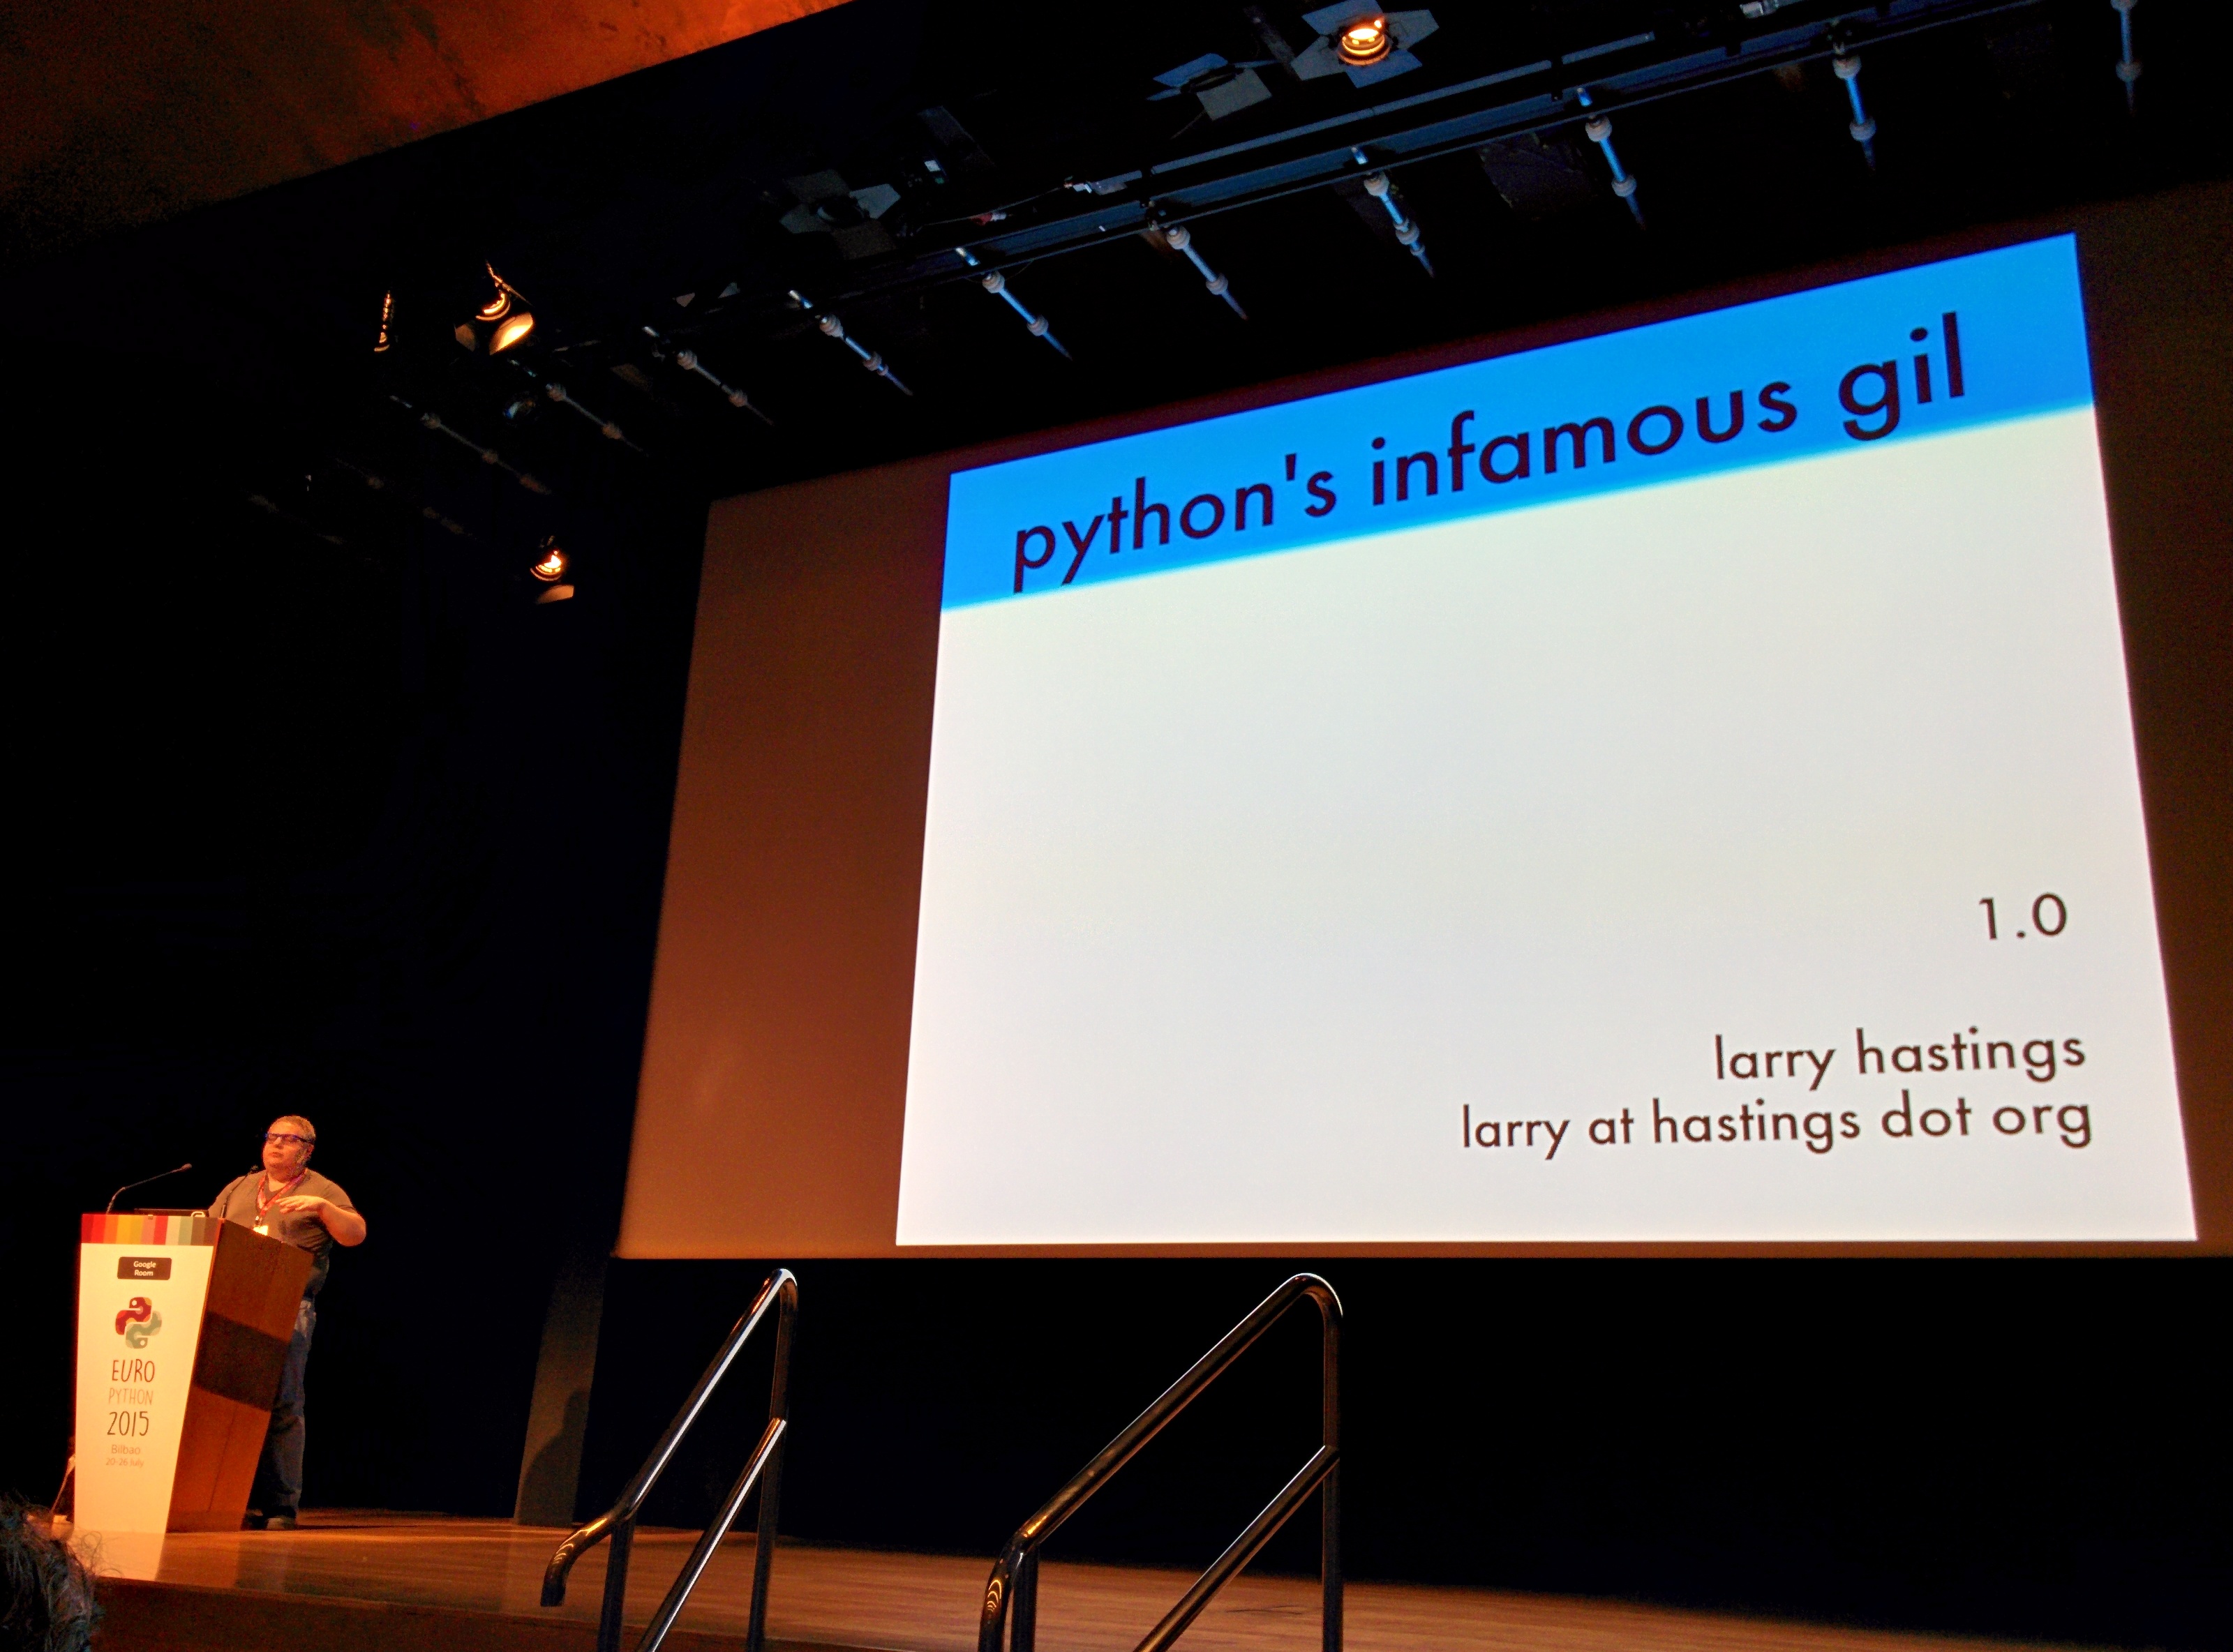 larry hastings talking about the cpython gil